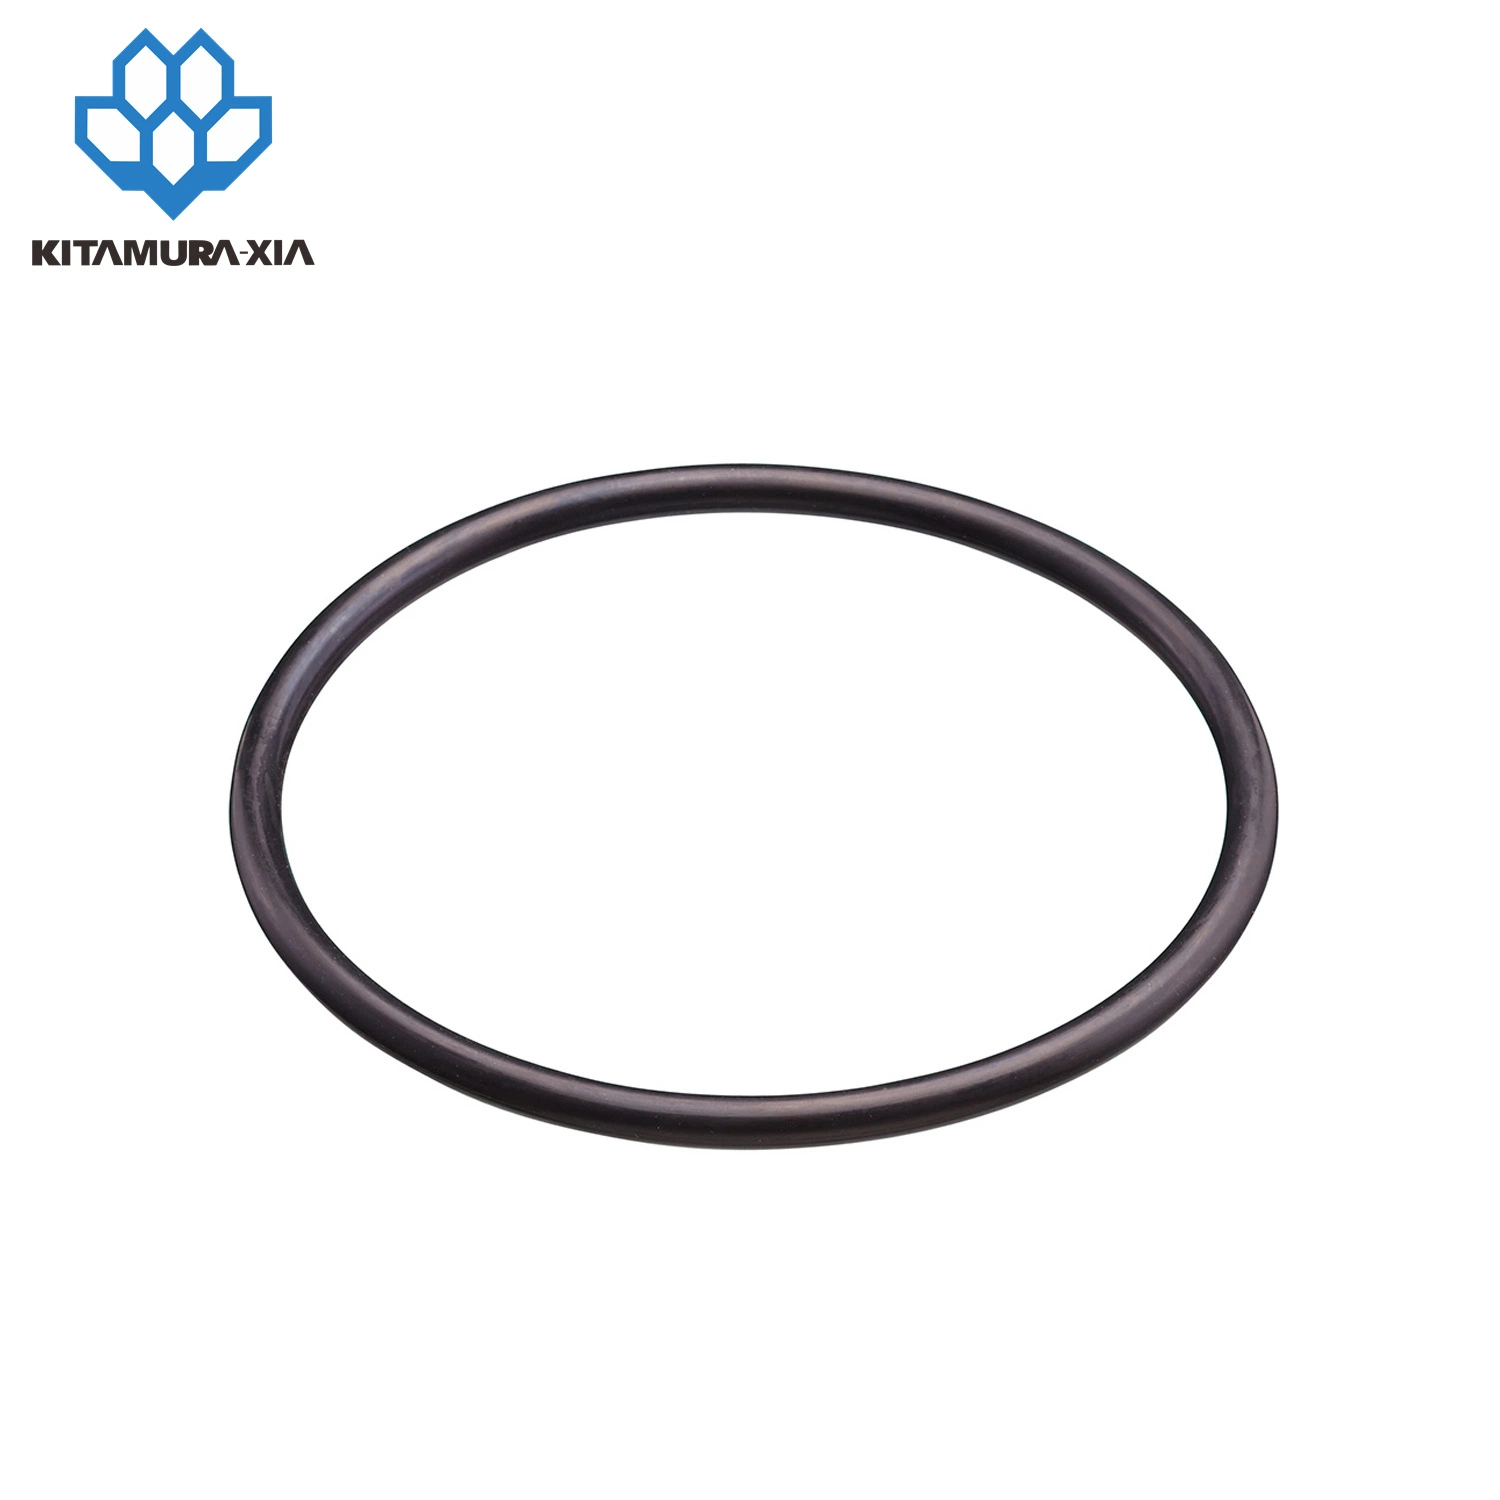 Customized FPM FKM NBR HNBR EPDM Silicone Nitrile Rubber Oil Seal Oring